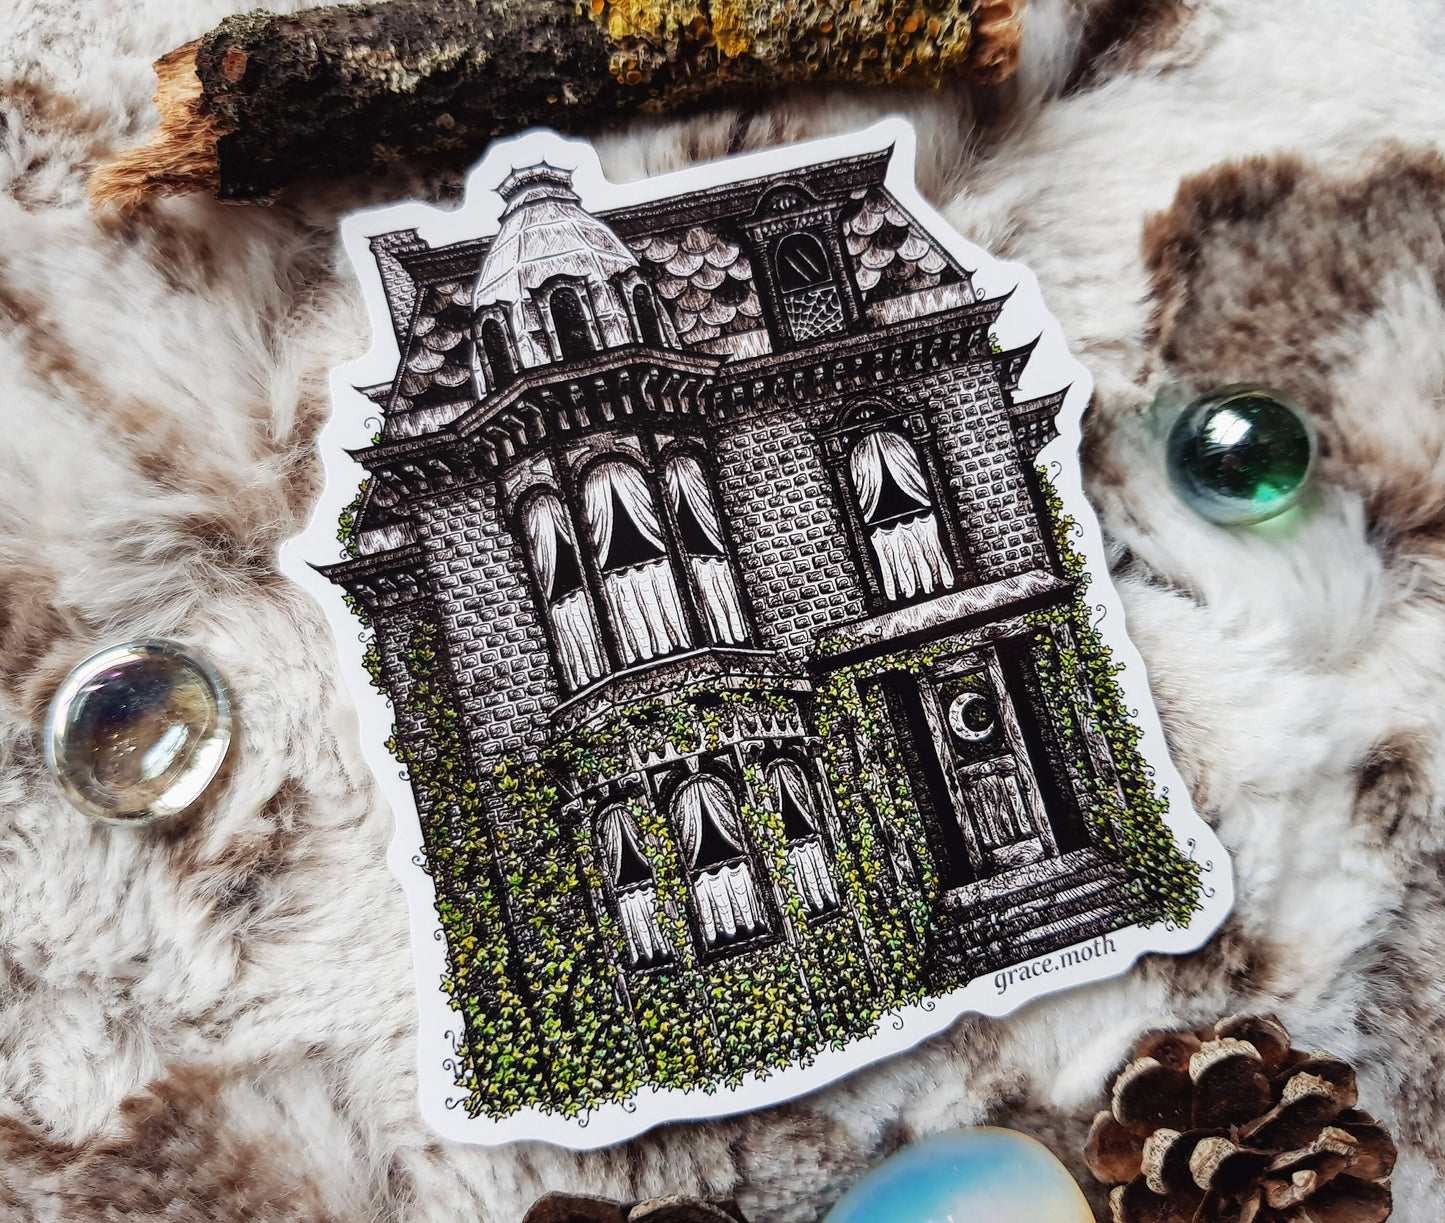 Haunted House - Vinyl Sticker 10cm by 9cm - illustrated by Grace Moth. Gothic art, witch, ivy, spooky, fantasy, inkwork, victorian house